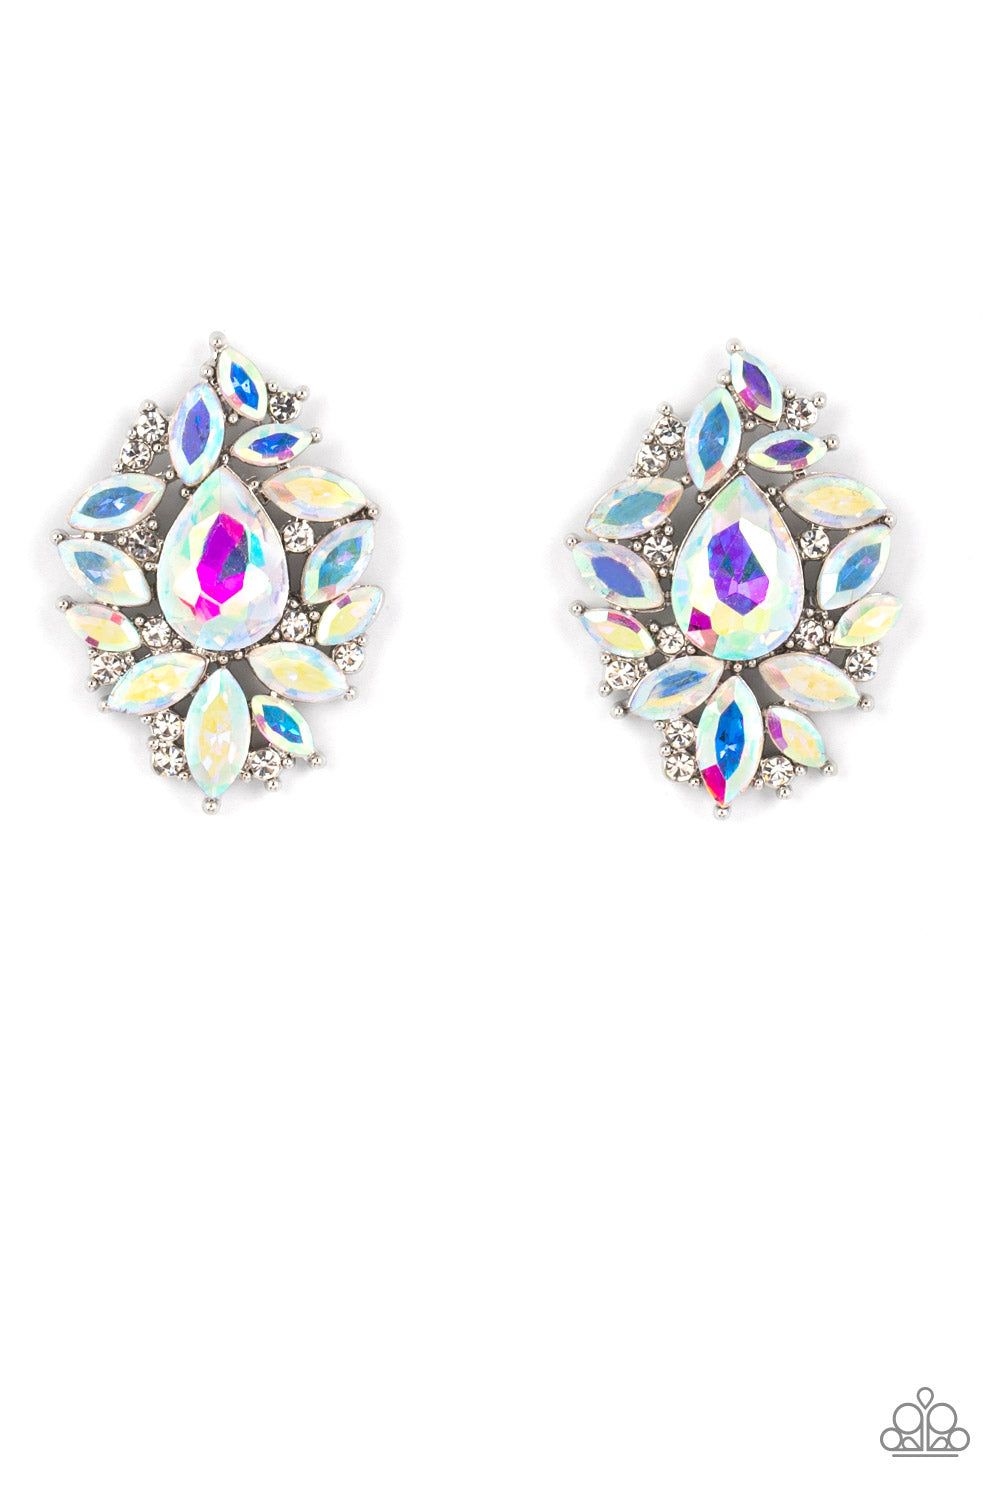 We All Scream for Ice QUEEN - Multi Paparazzi Earrings